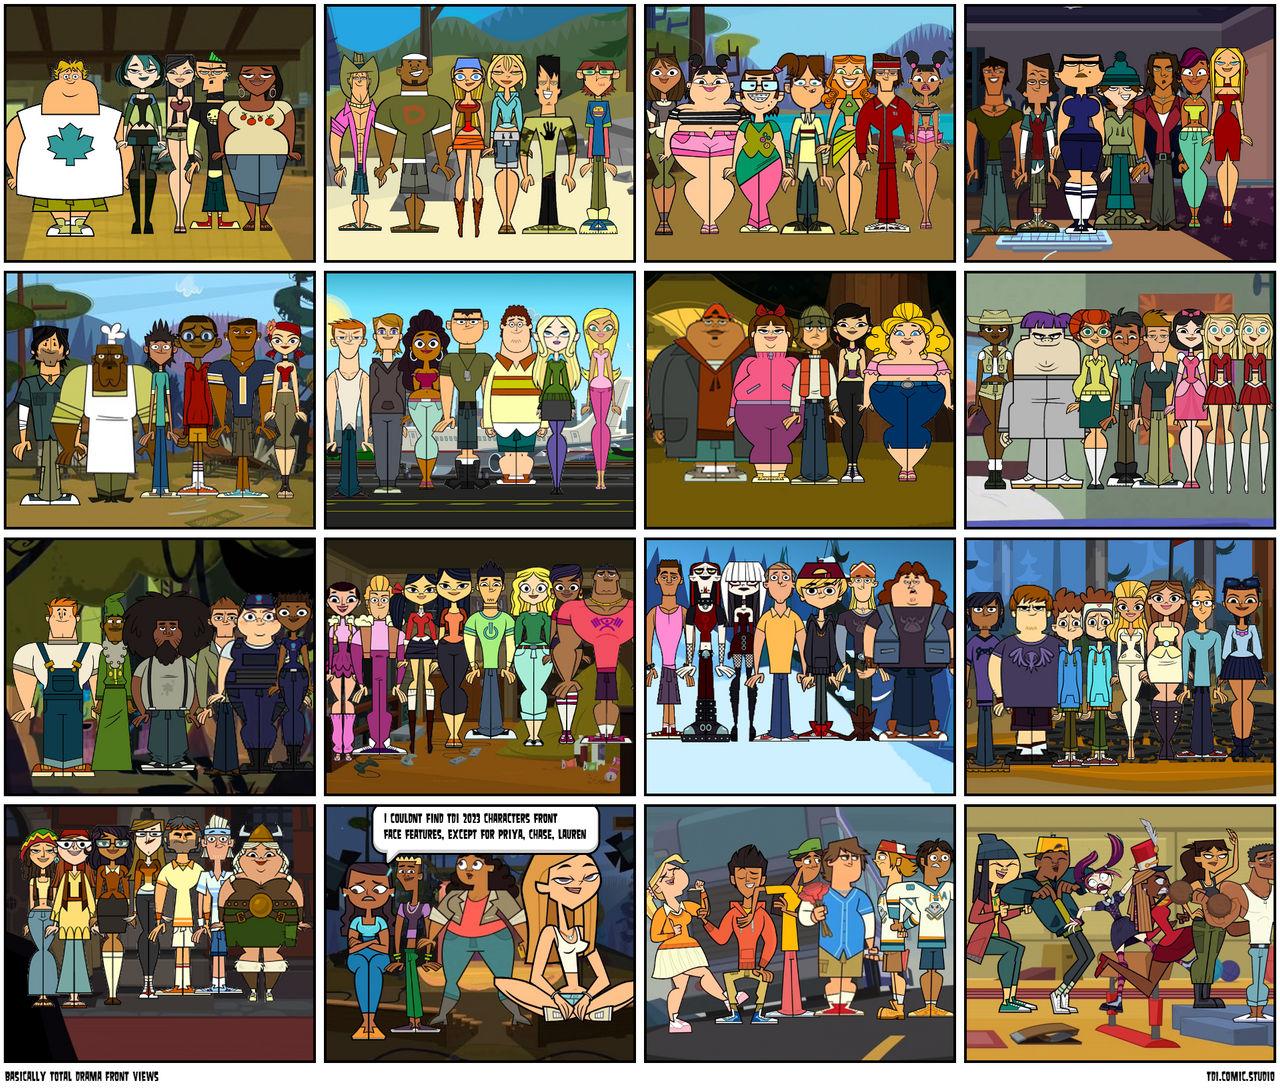 Total Drama 2023 Contestants by Mdwyer5 on DeviantArt